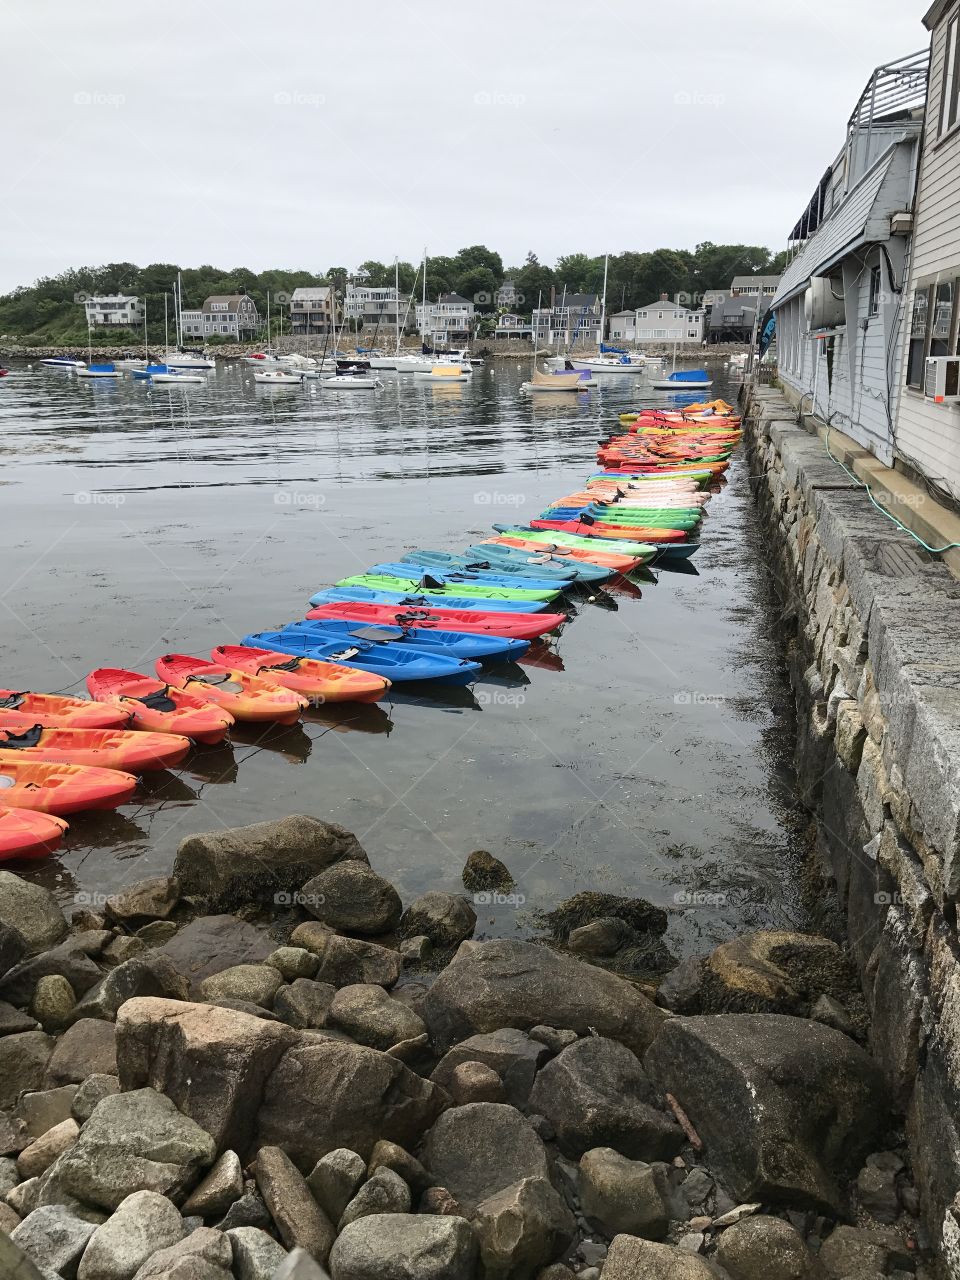 Kayaks lined up in harbor in Rockport